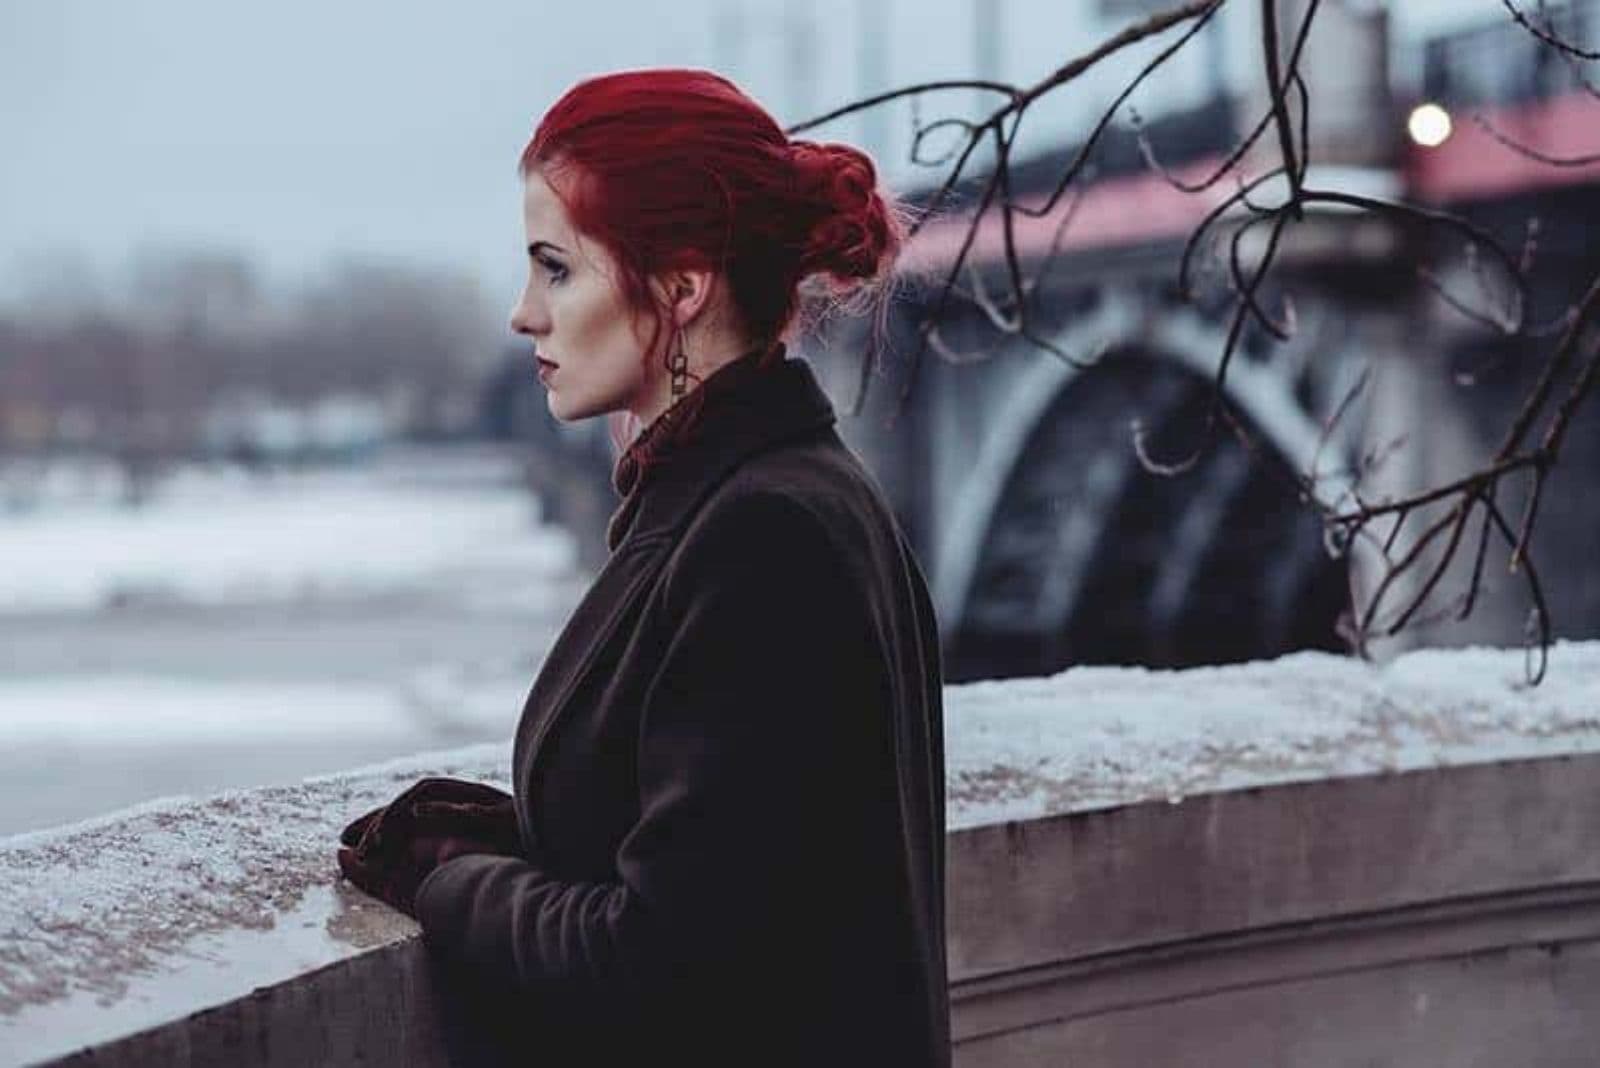 thoughtful woman with red hair and brown jacket standing outside